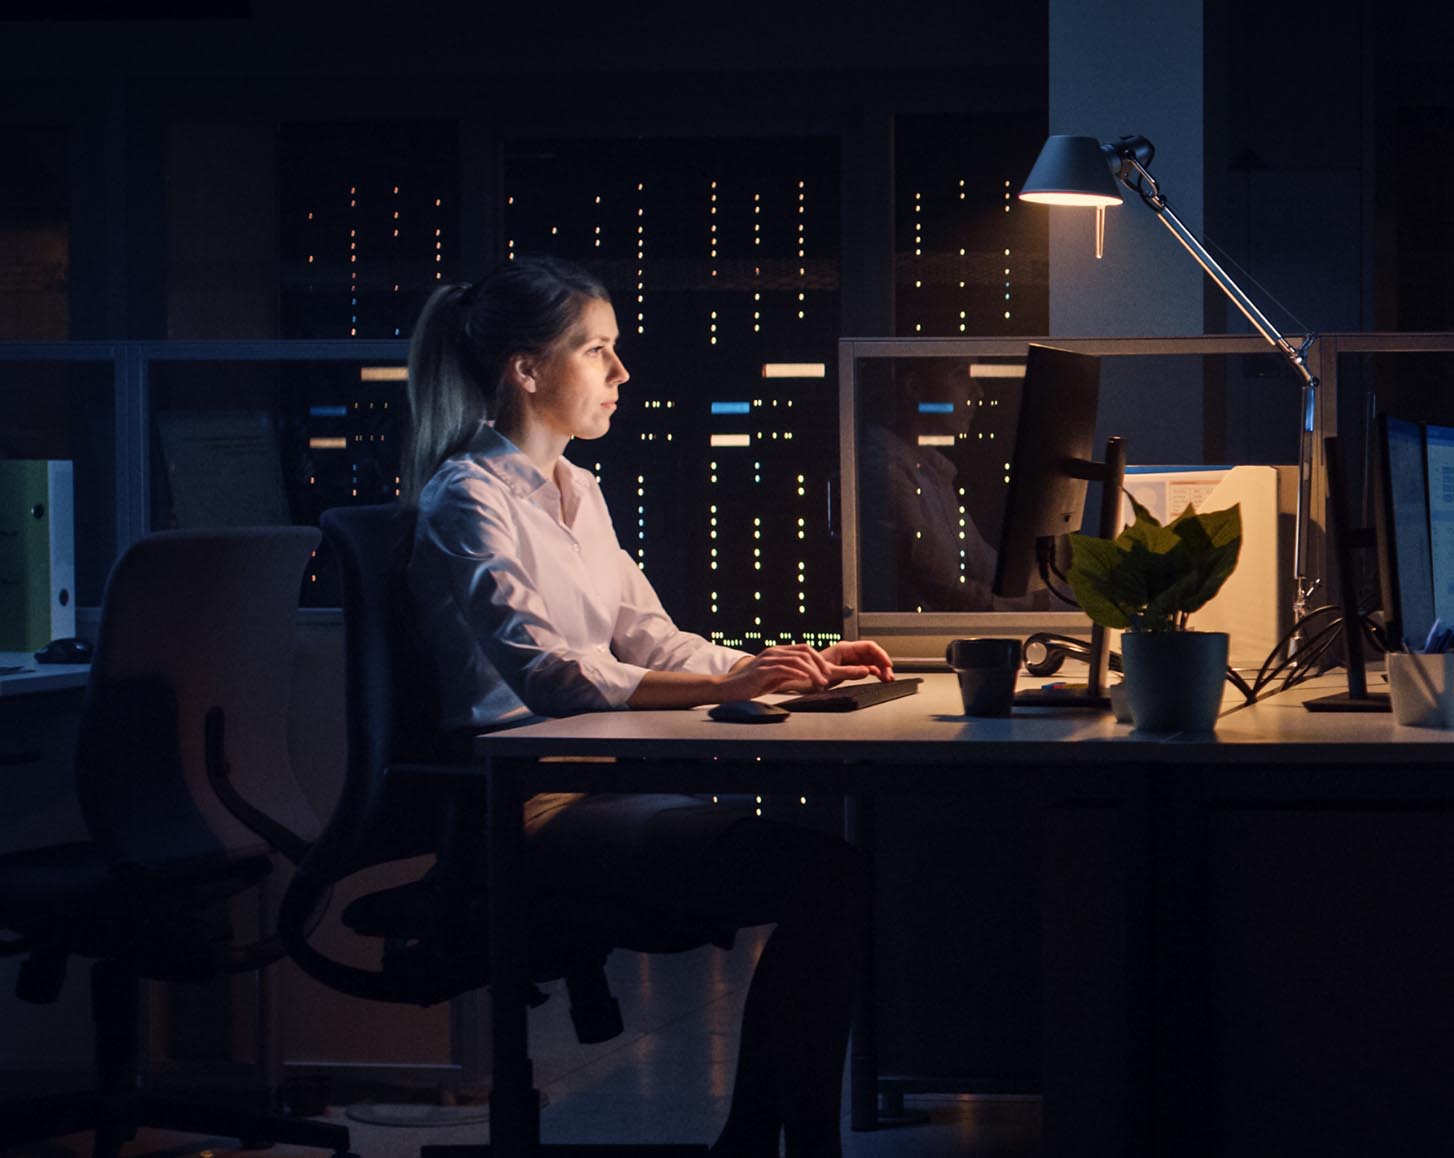 A woman in an office at night, dimly lit by her desk lamp